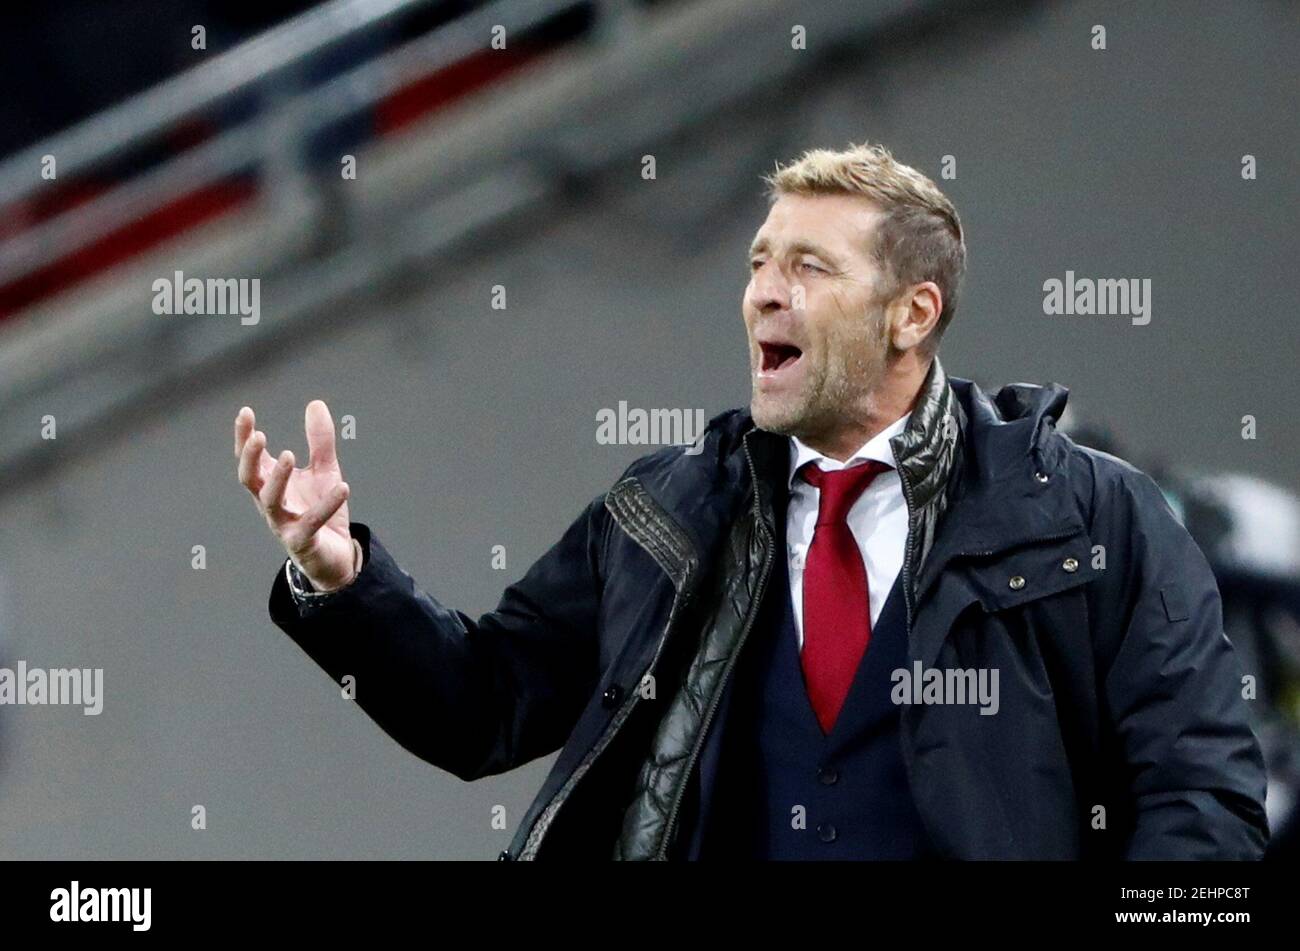 Soccer Football - Europa League - Group Stage - Group G - Spartak Moscow v Villarreal - Spartak Stadium, Moscow, Russia - October 4, 2018  Spartak Moscow coach Massimo Carrera reacts  REUTERS/Sergei Karpukhin Stock Photo